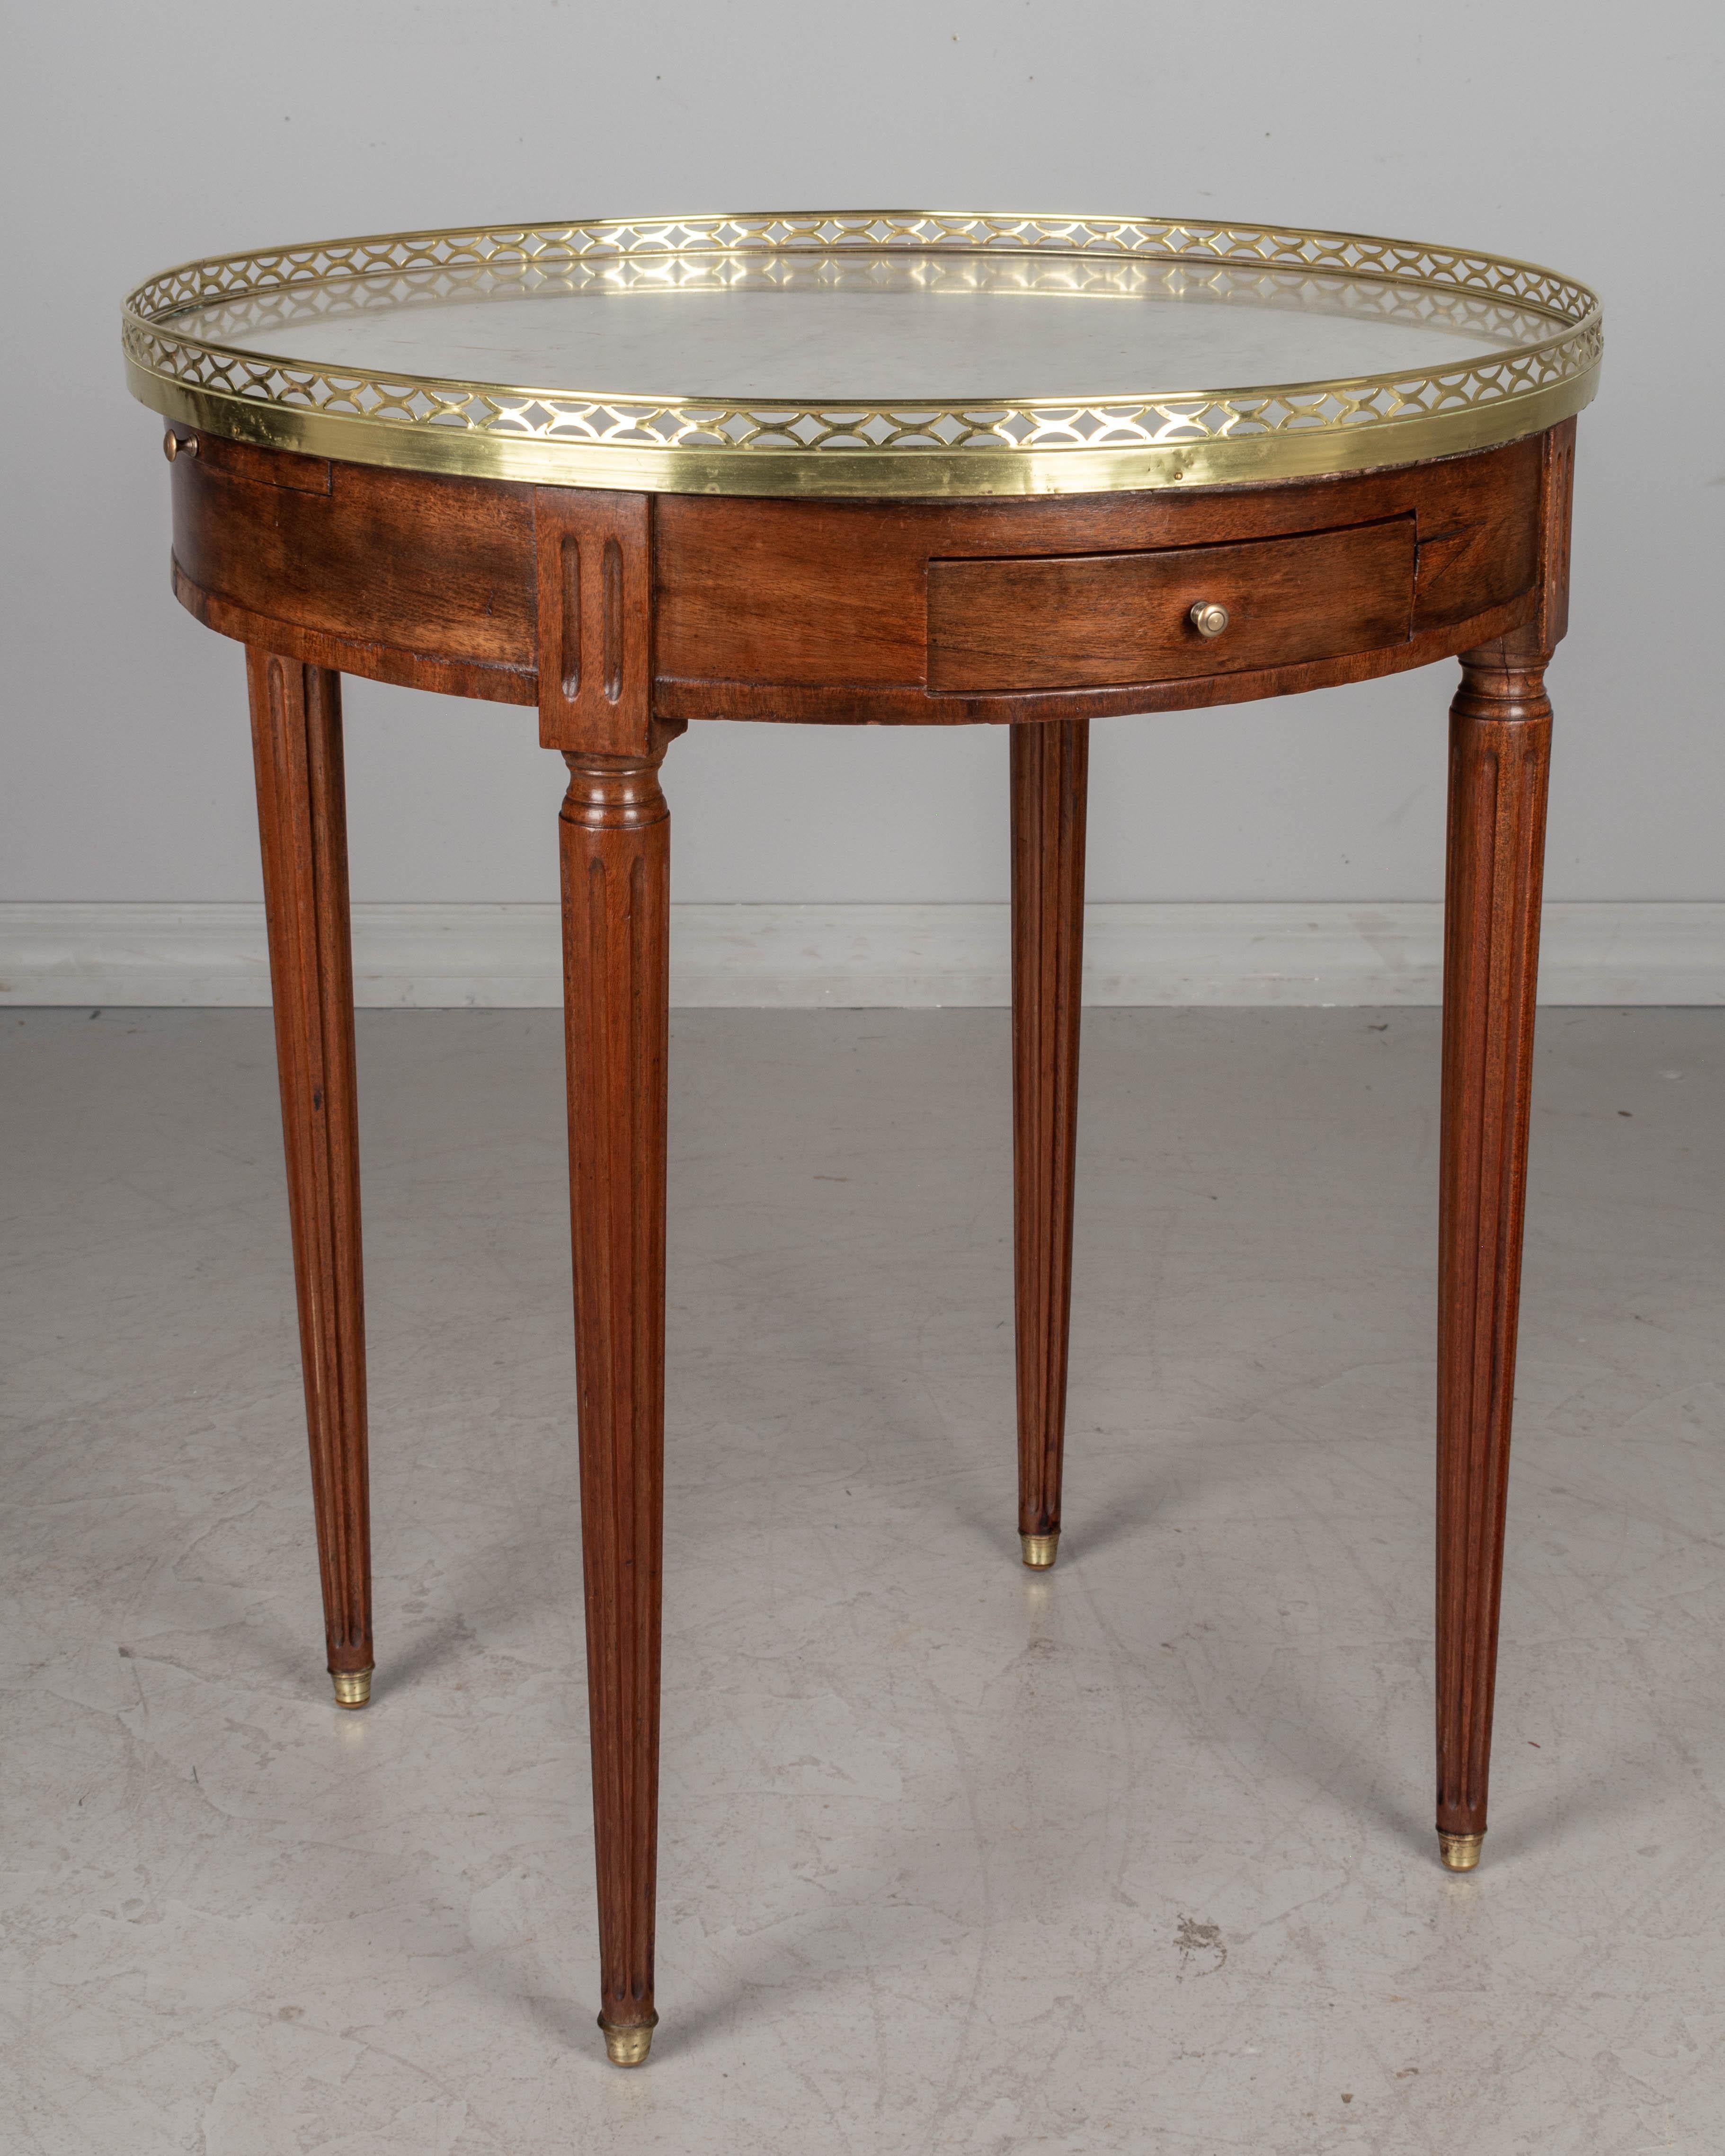 A 19th century Louis XVI style bouillotte table made of mahogany with fluted legs ending in brass sabots. Original white veined marble top with polished brass gallery. Two dovetailed drawers and two pull out shelves with green leather surface. All